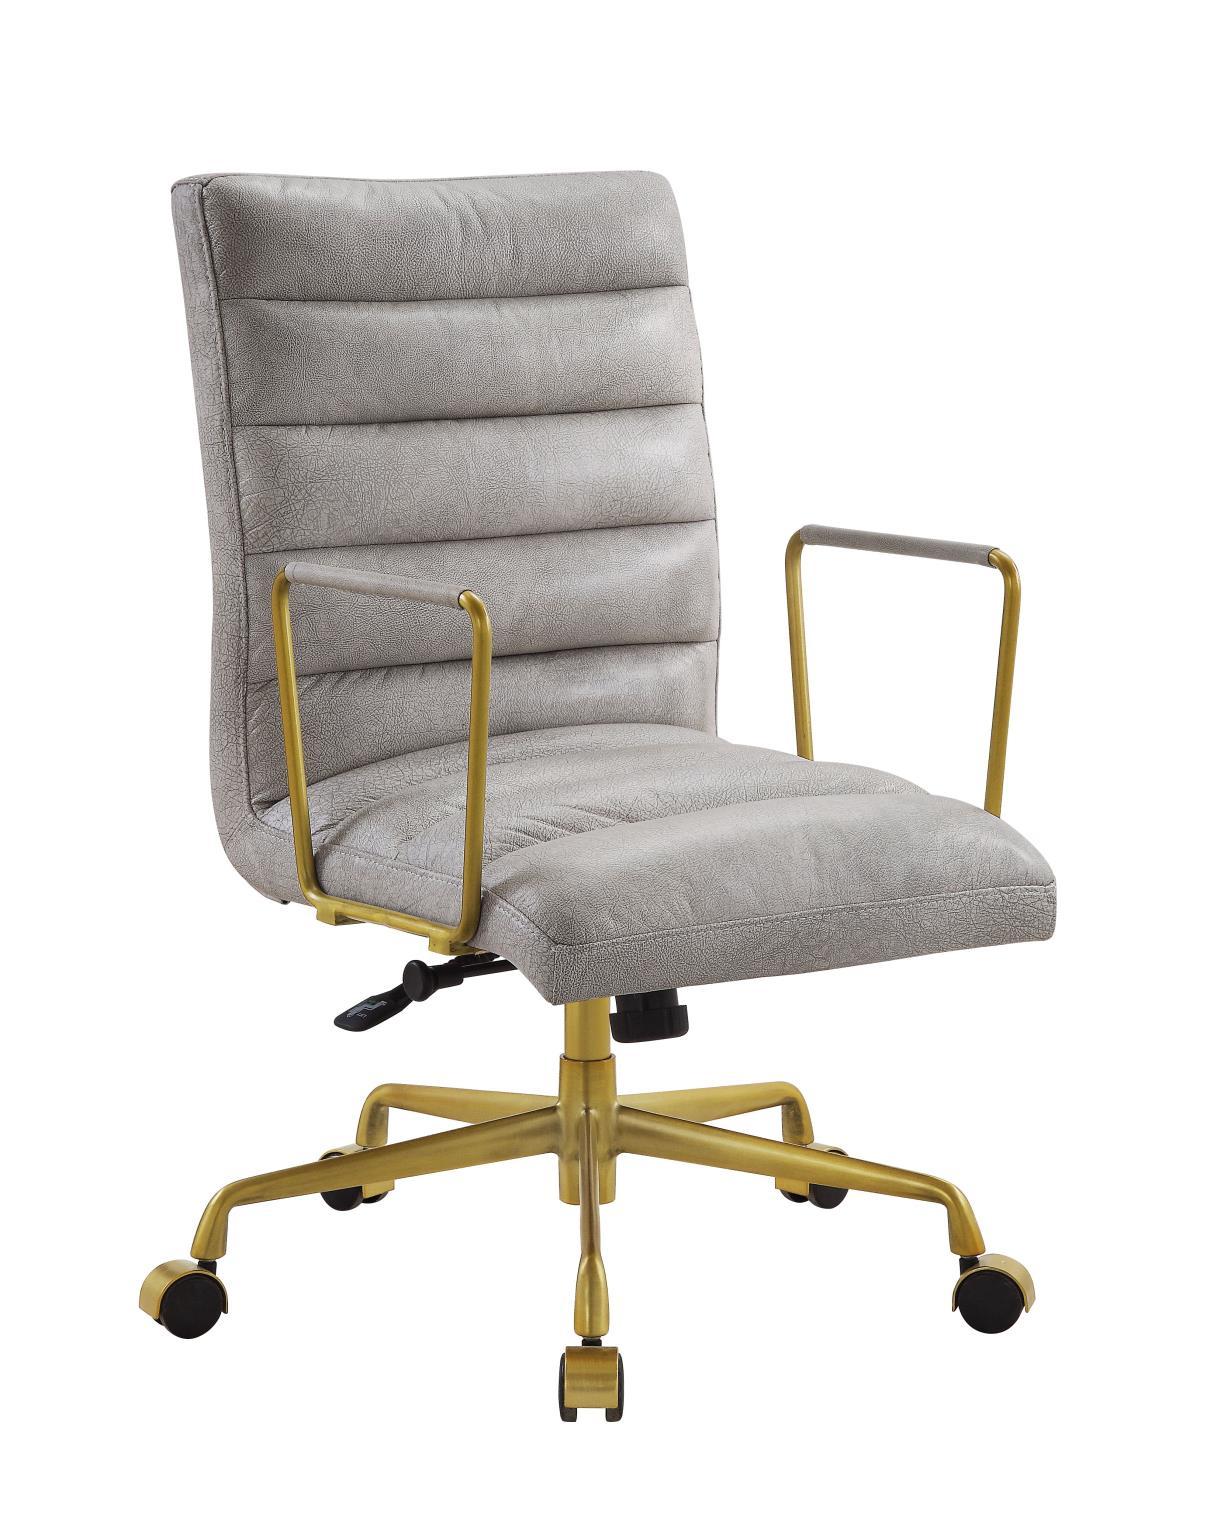 Contemporary, Modern Executive Chair Bellville Bellville 92497 in White Top grain leather